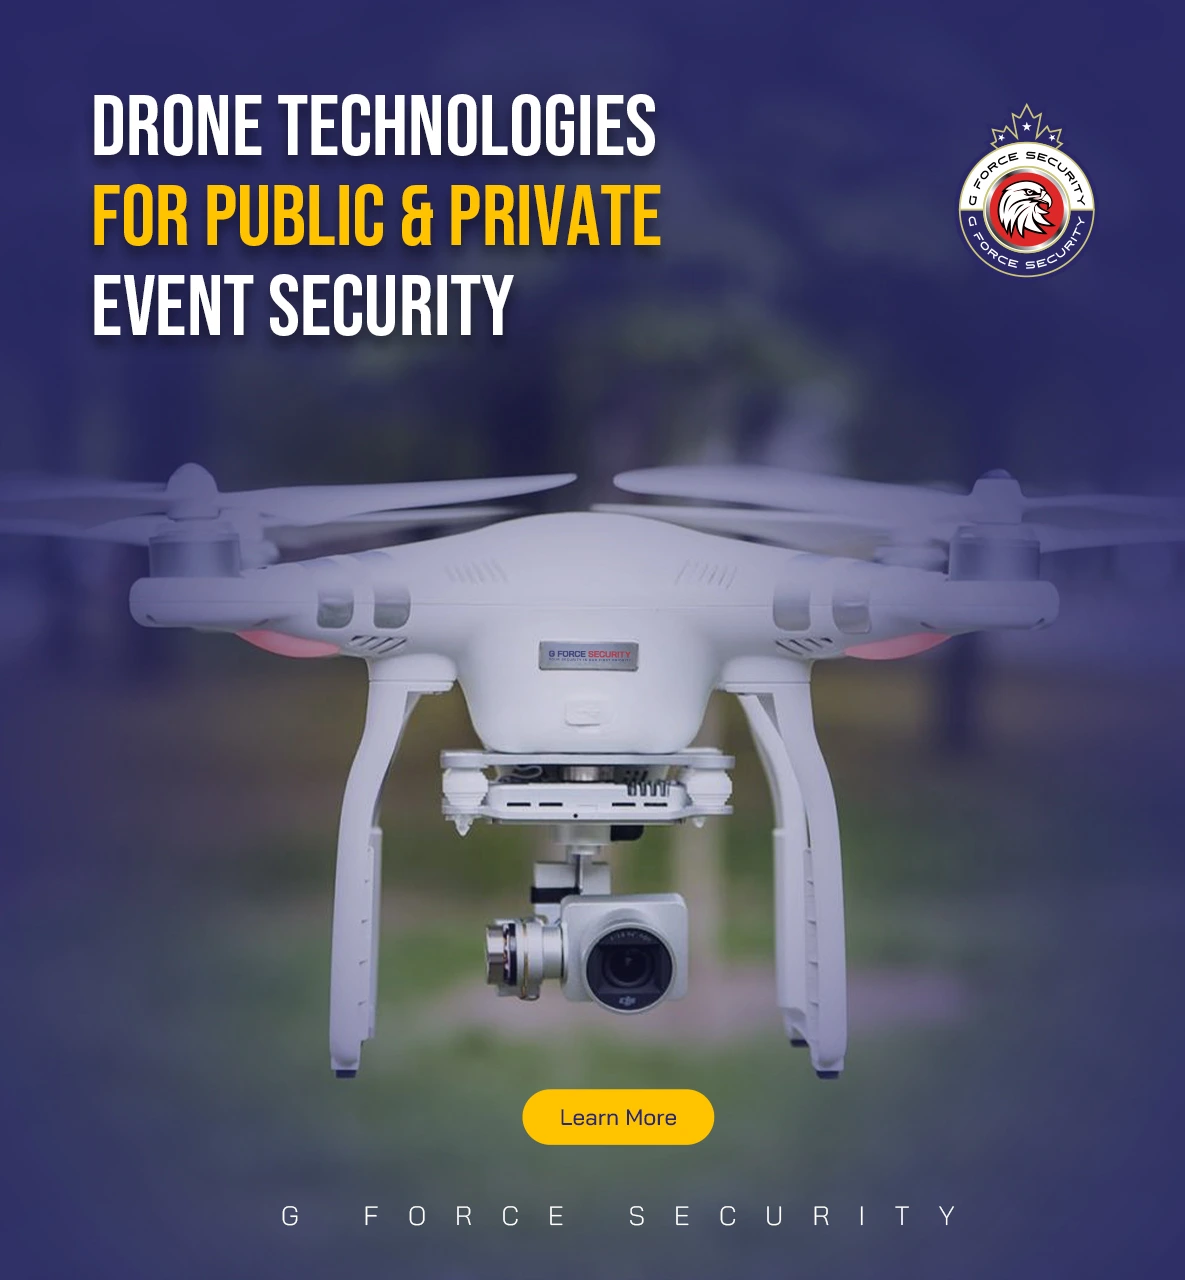 Drone Technologies for Public & Private Event Security?